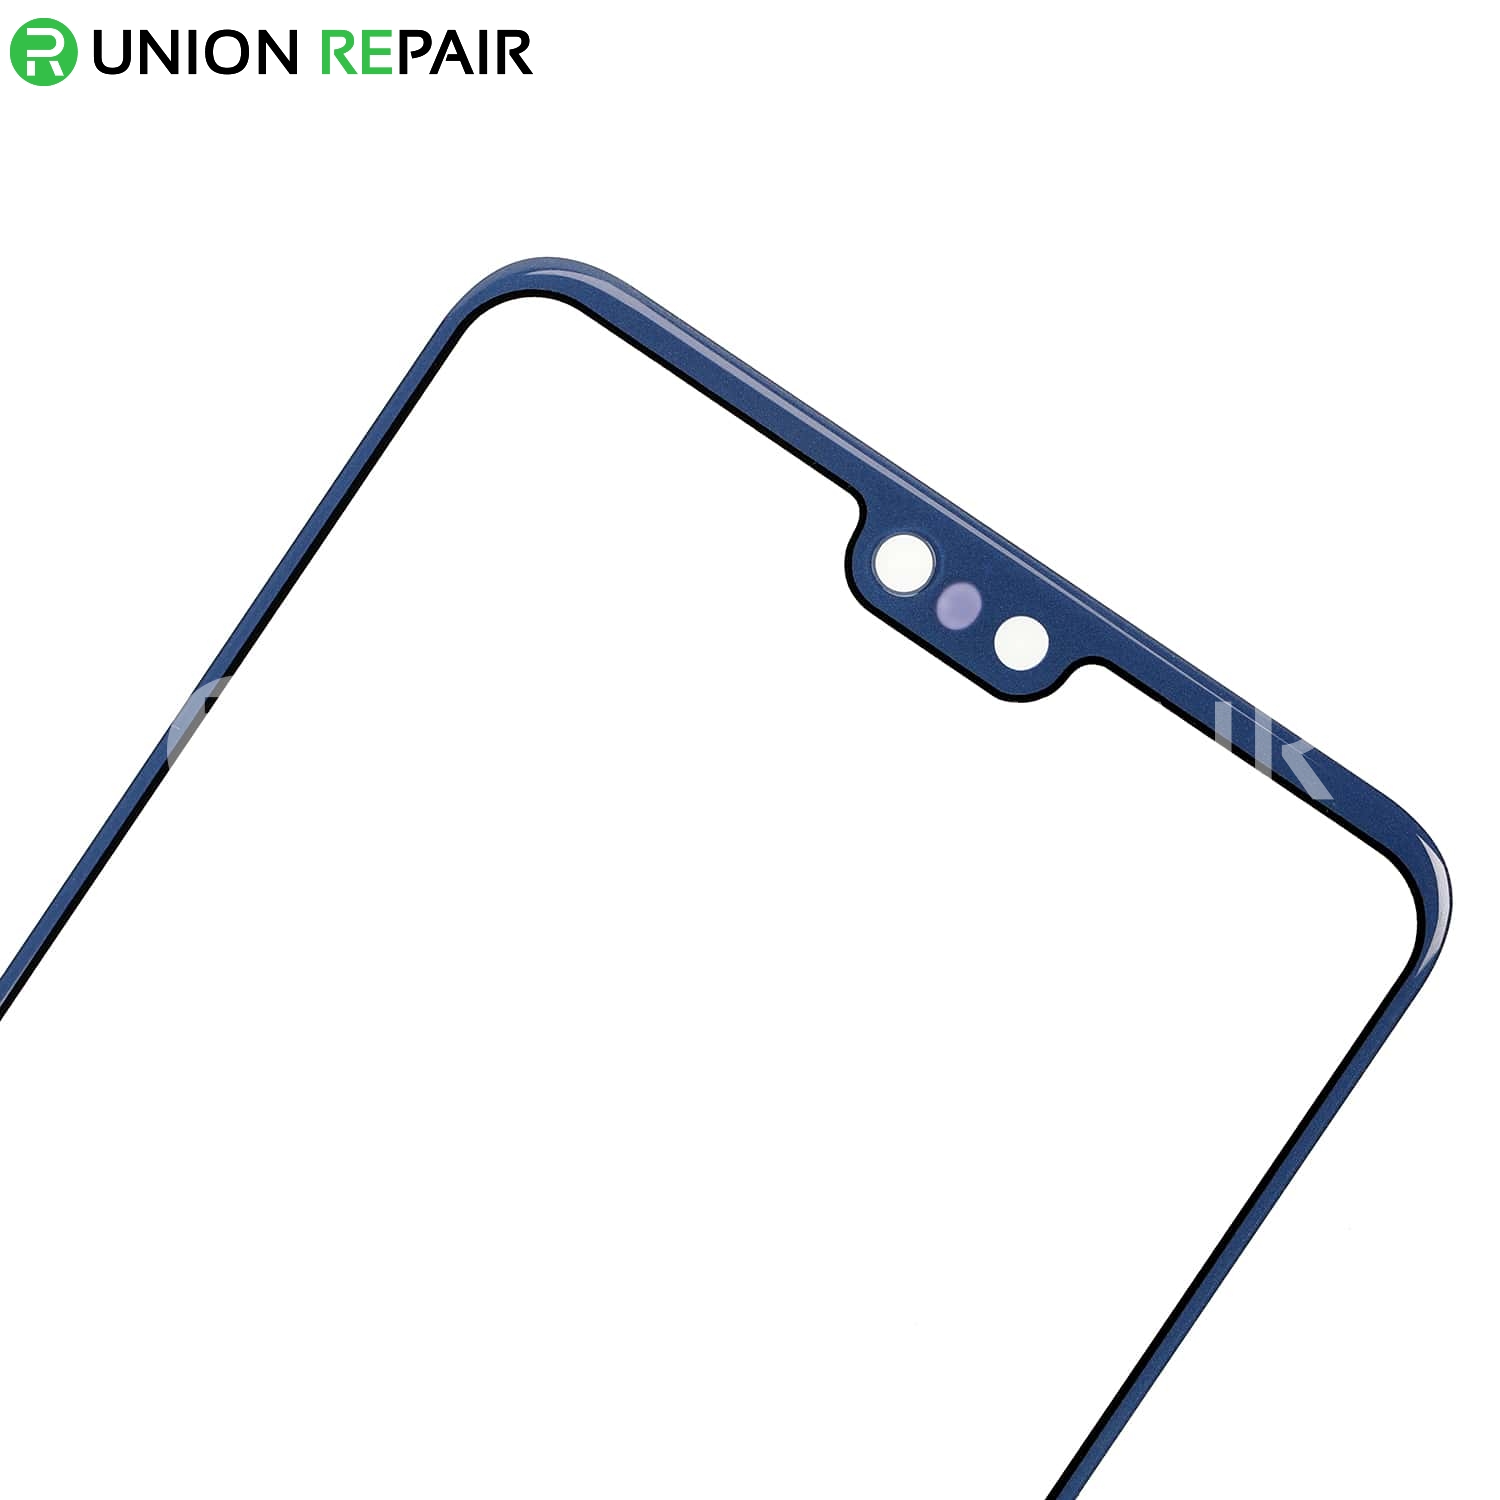 Replacement for Huawei P20 Front Glass Lens - Blue